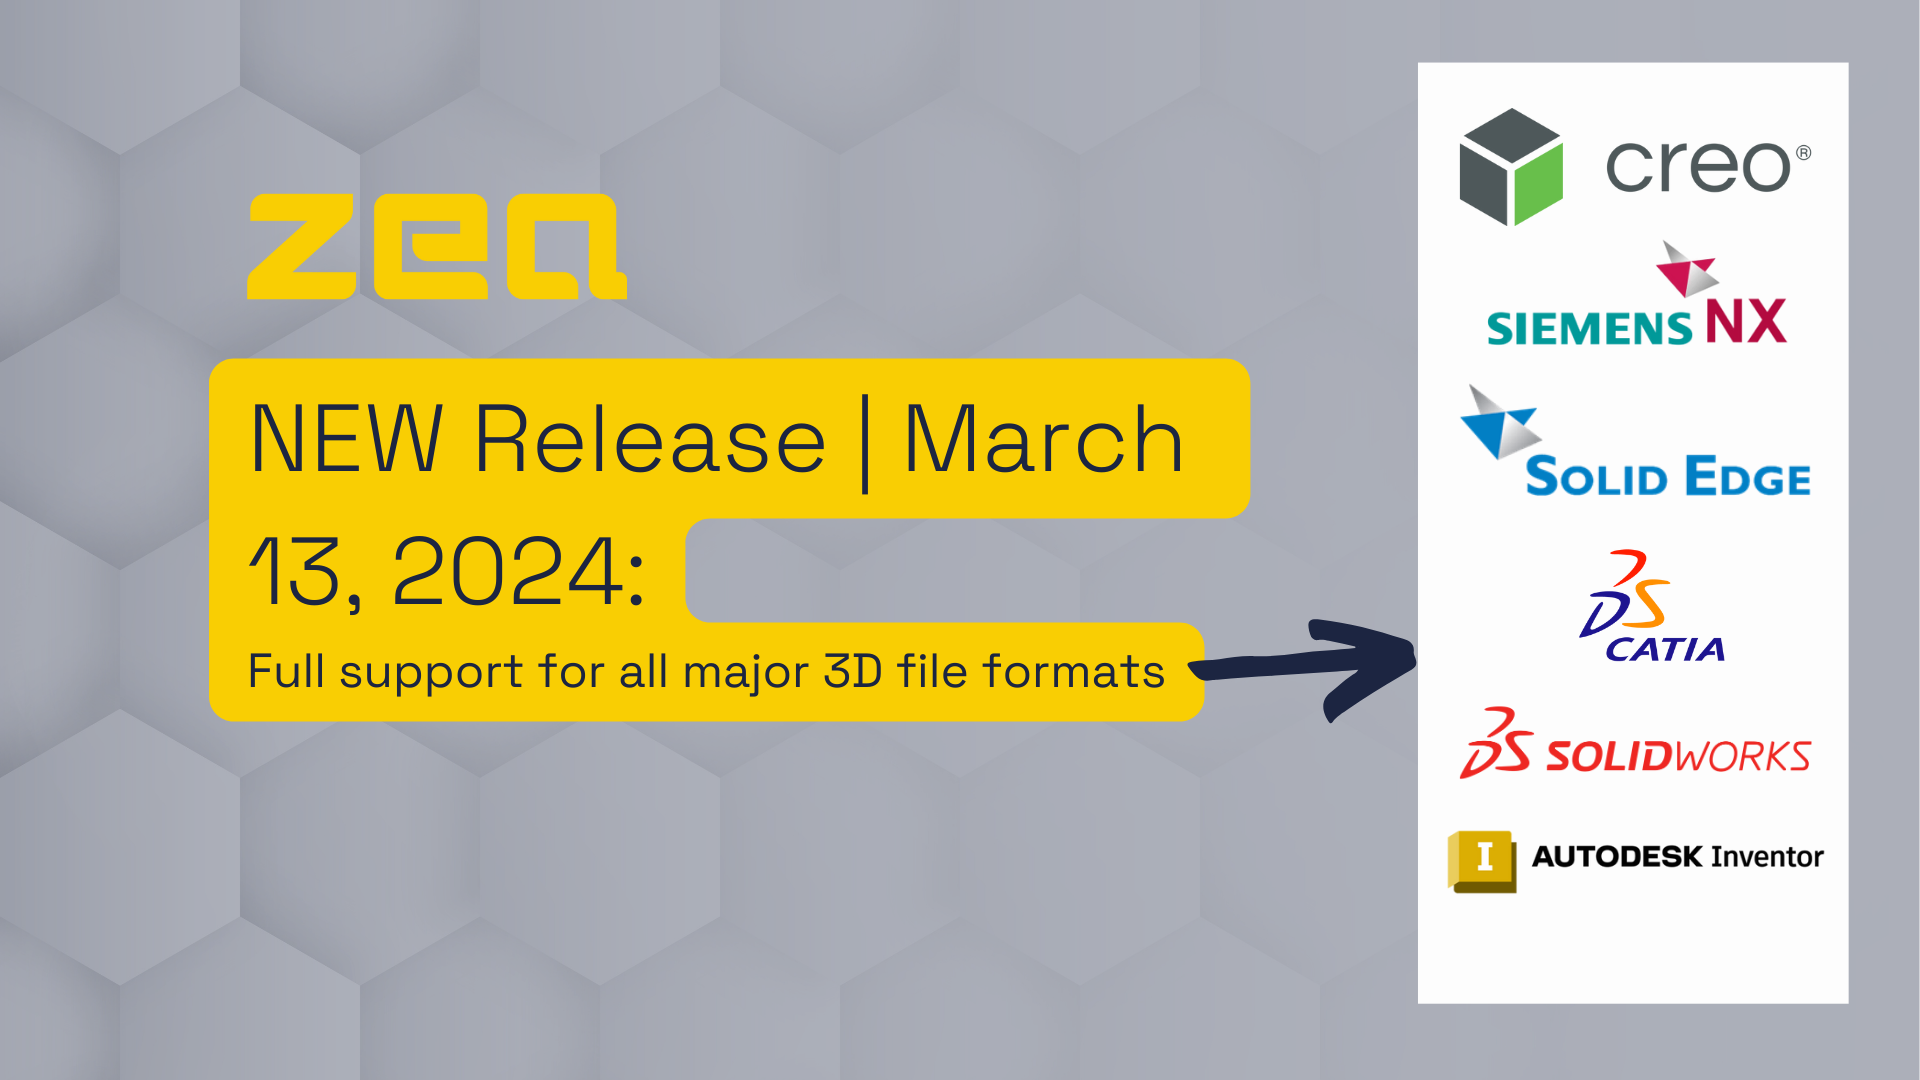 NEW Release | March 13, 2024